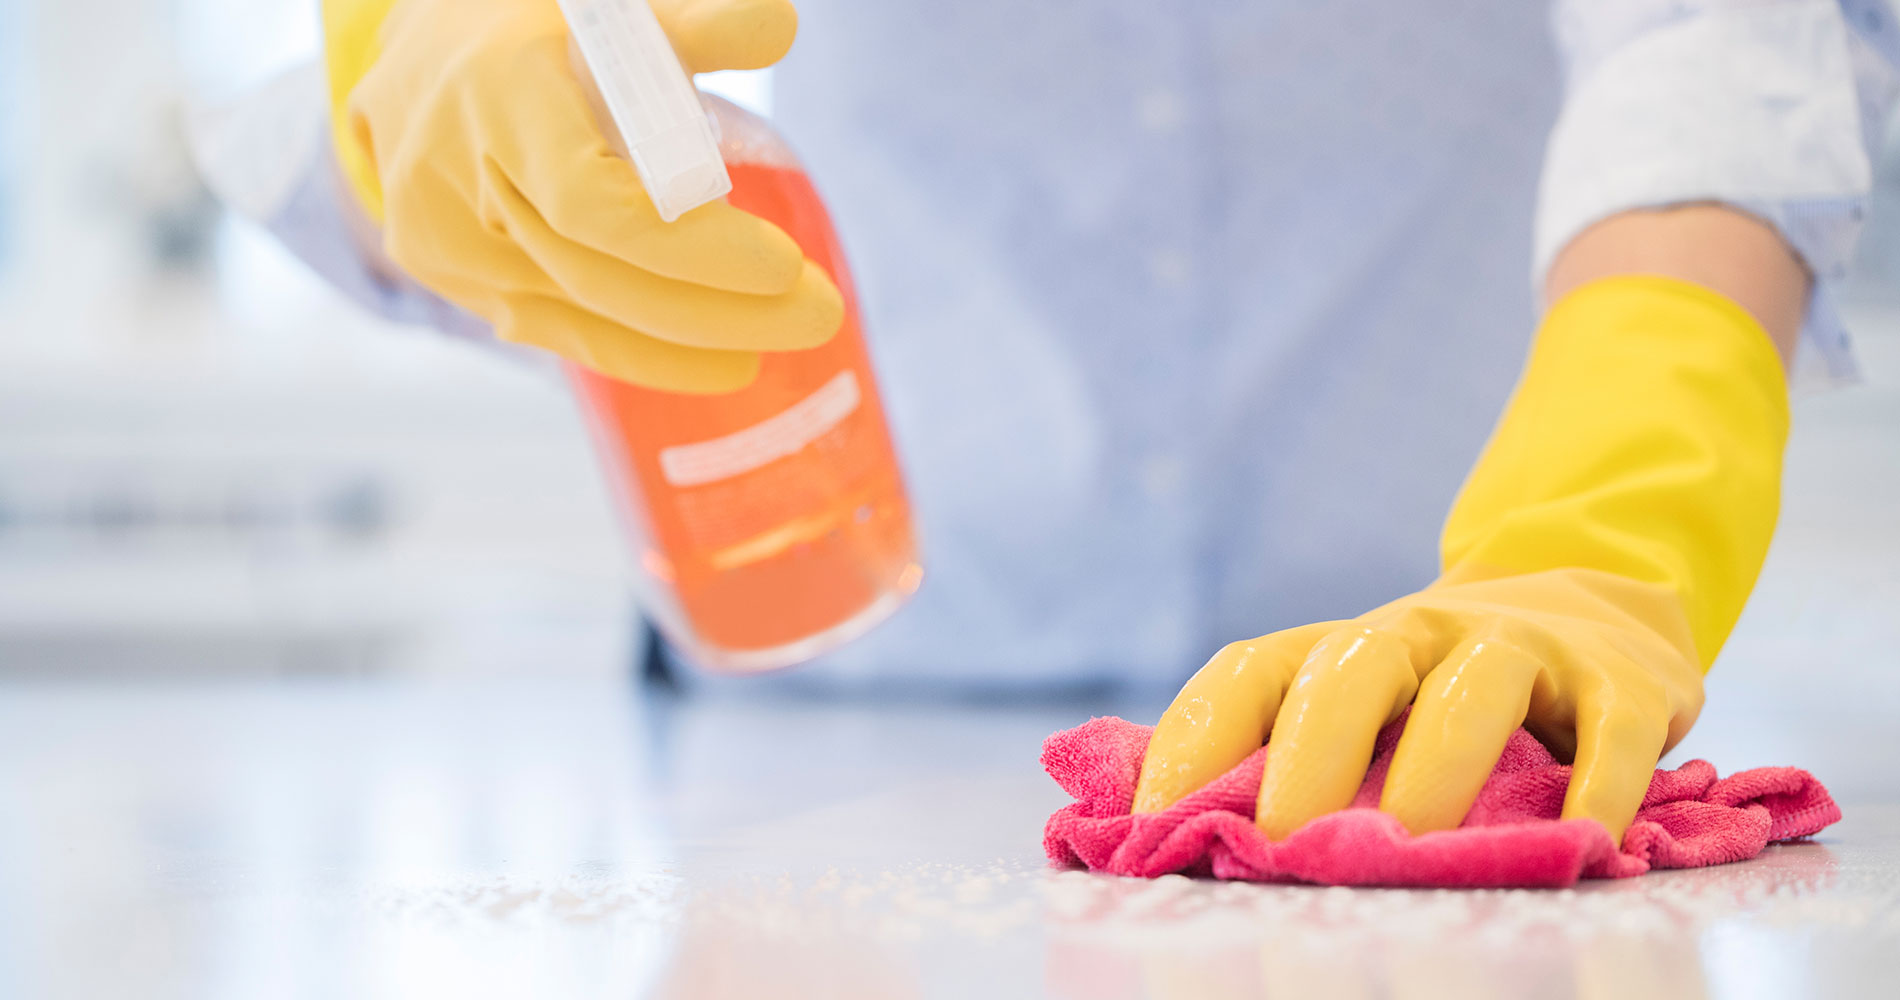 How to Maintain Cleanliness in Your Home